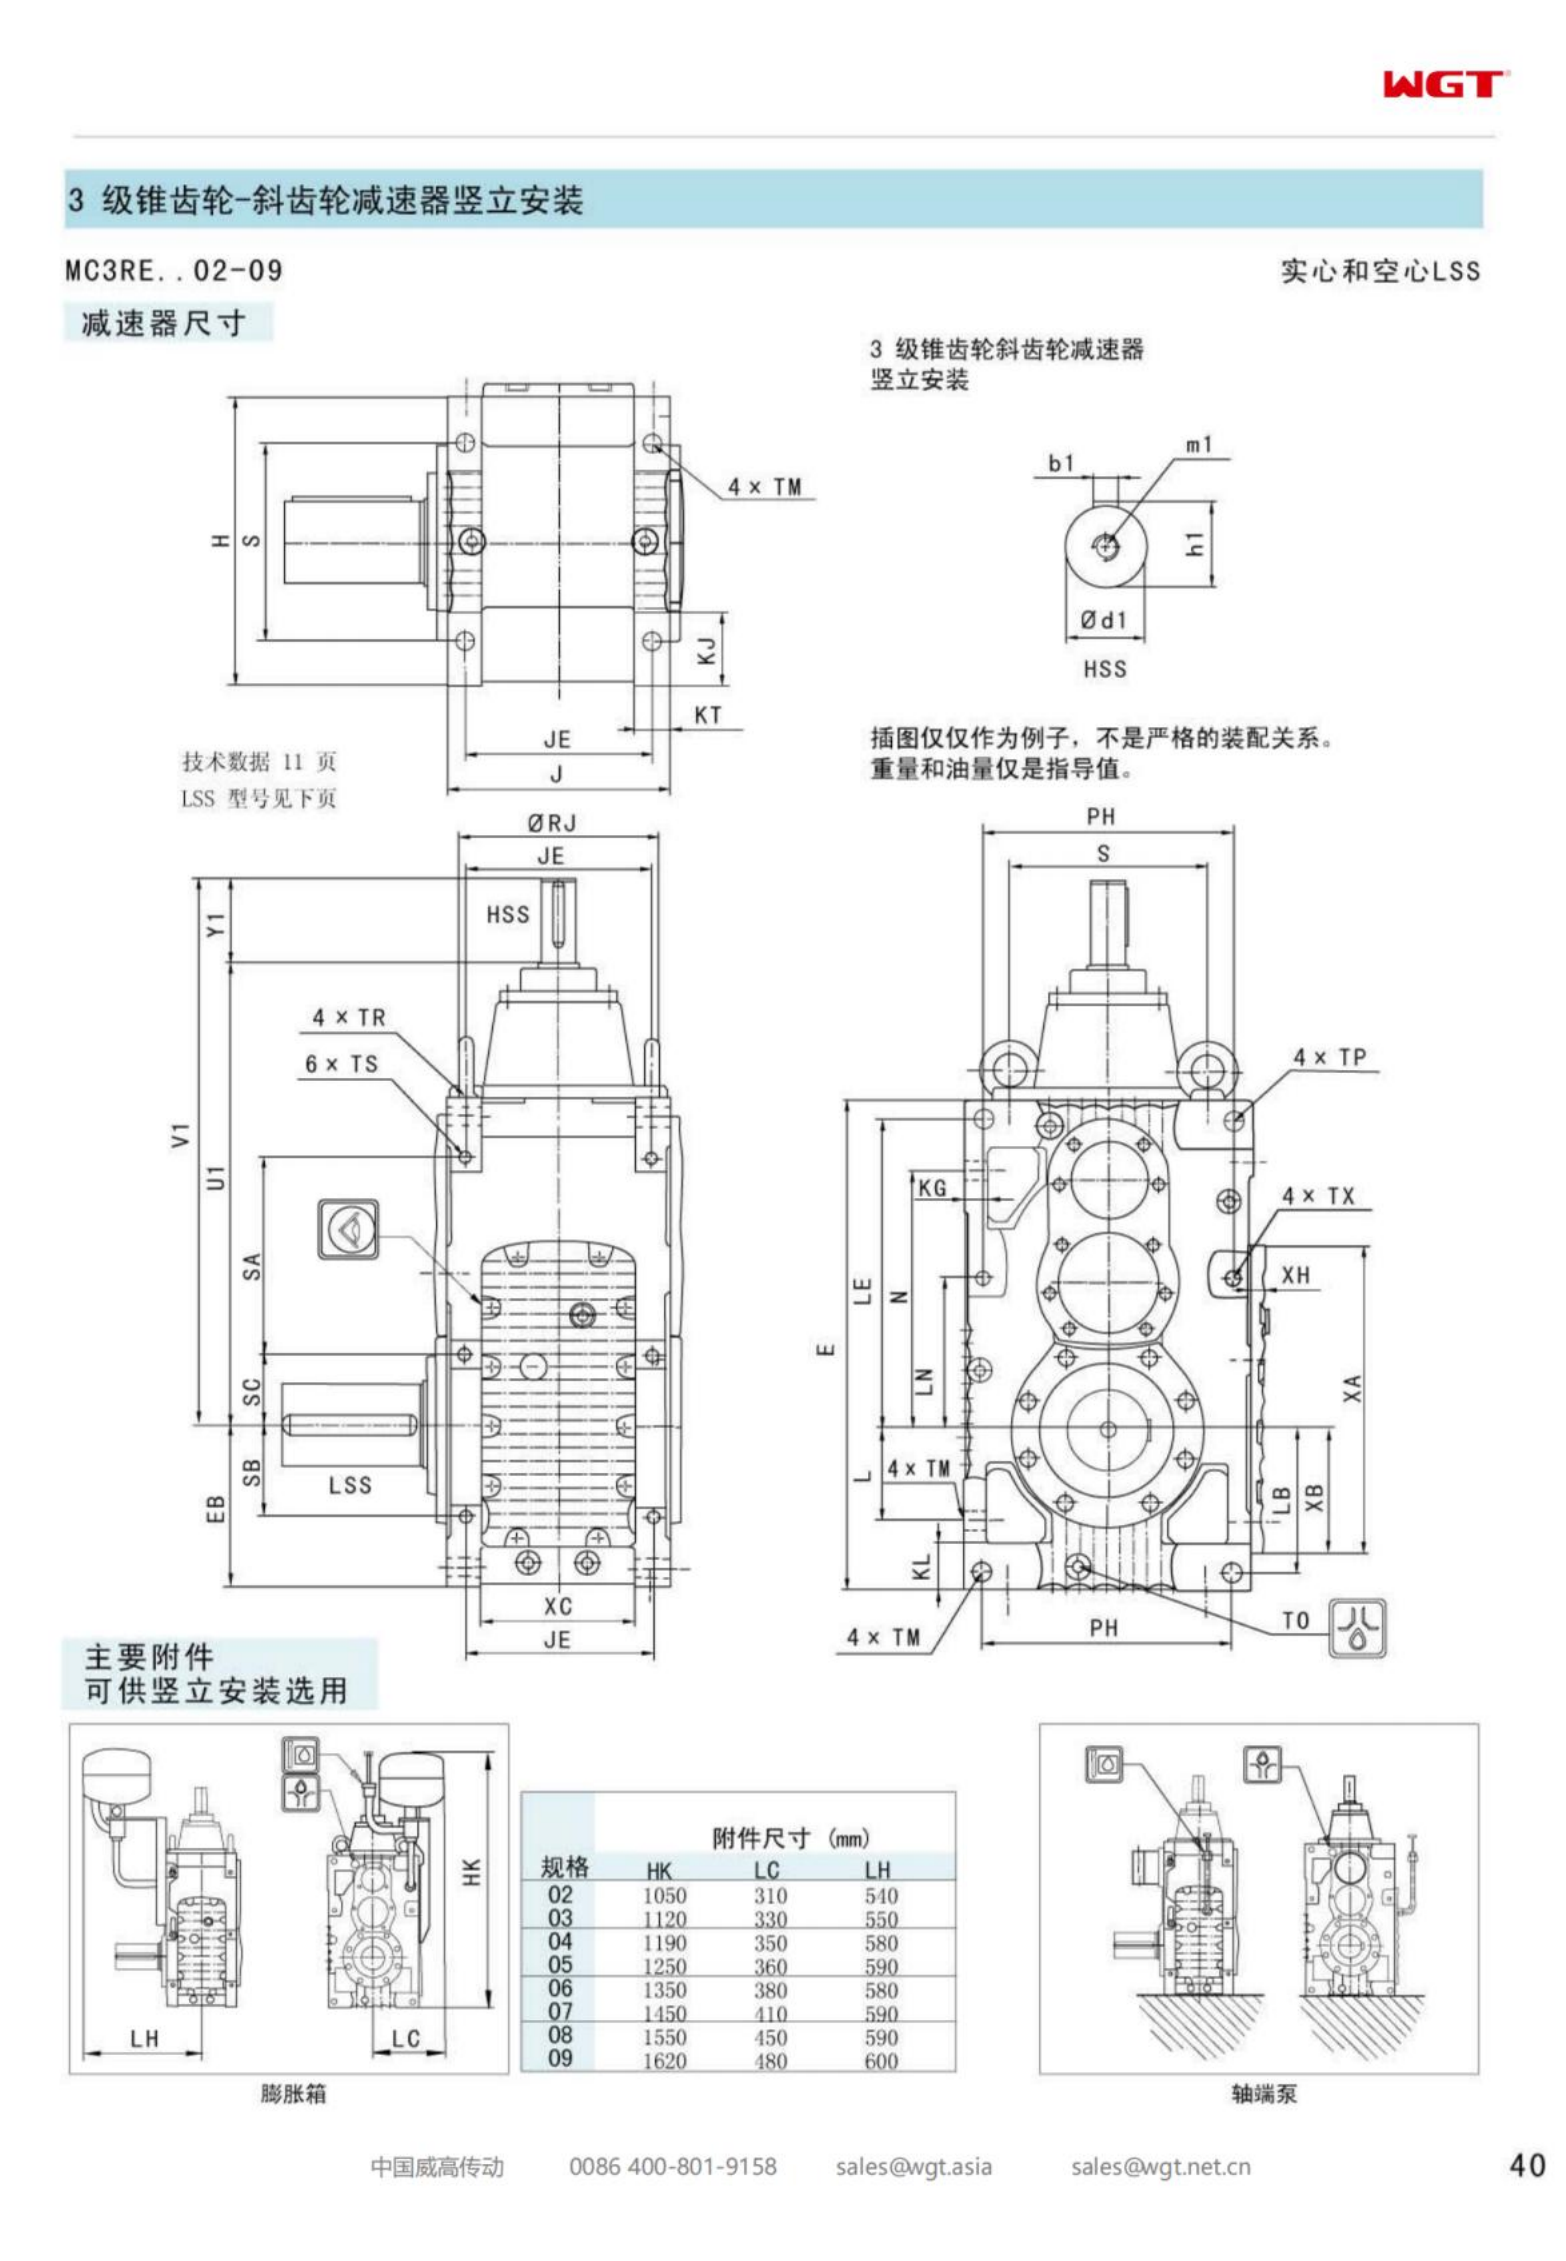 MC3RESF06 Replace_SEW_MC_Series Gearbox